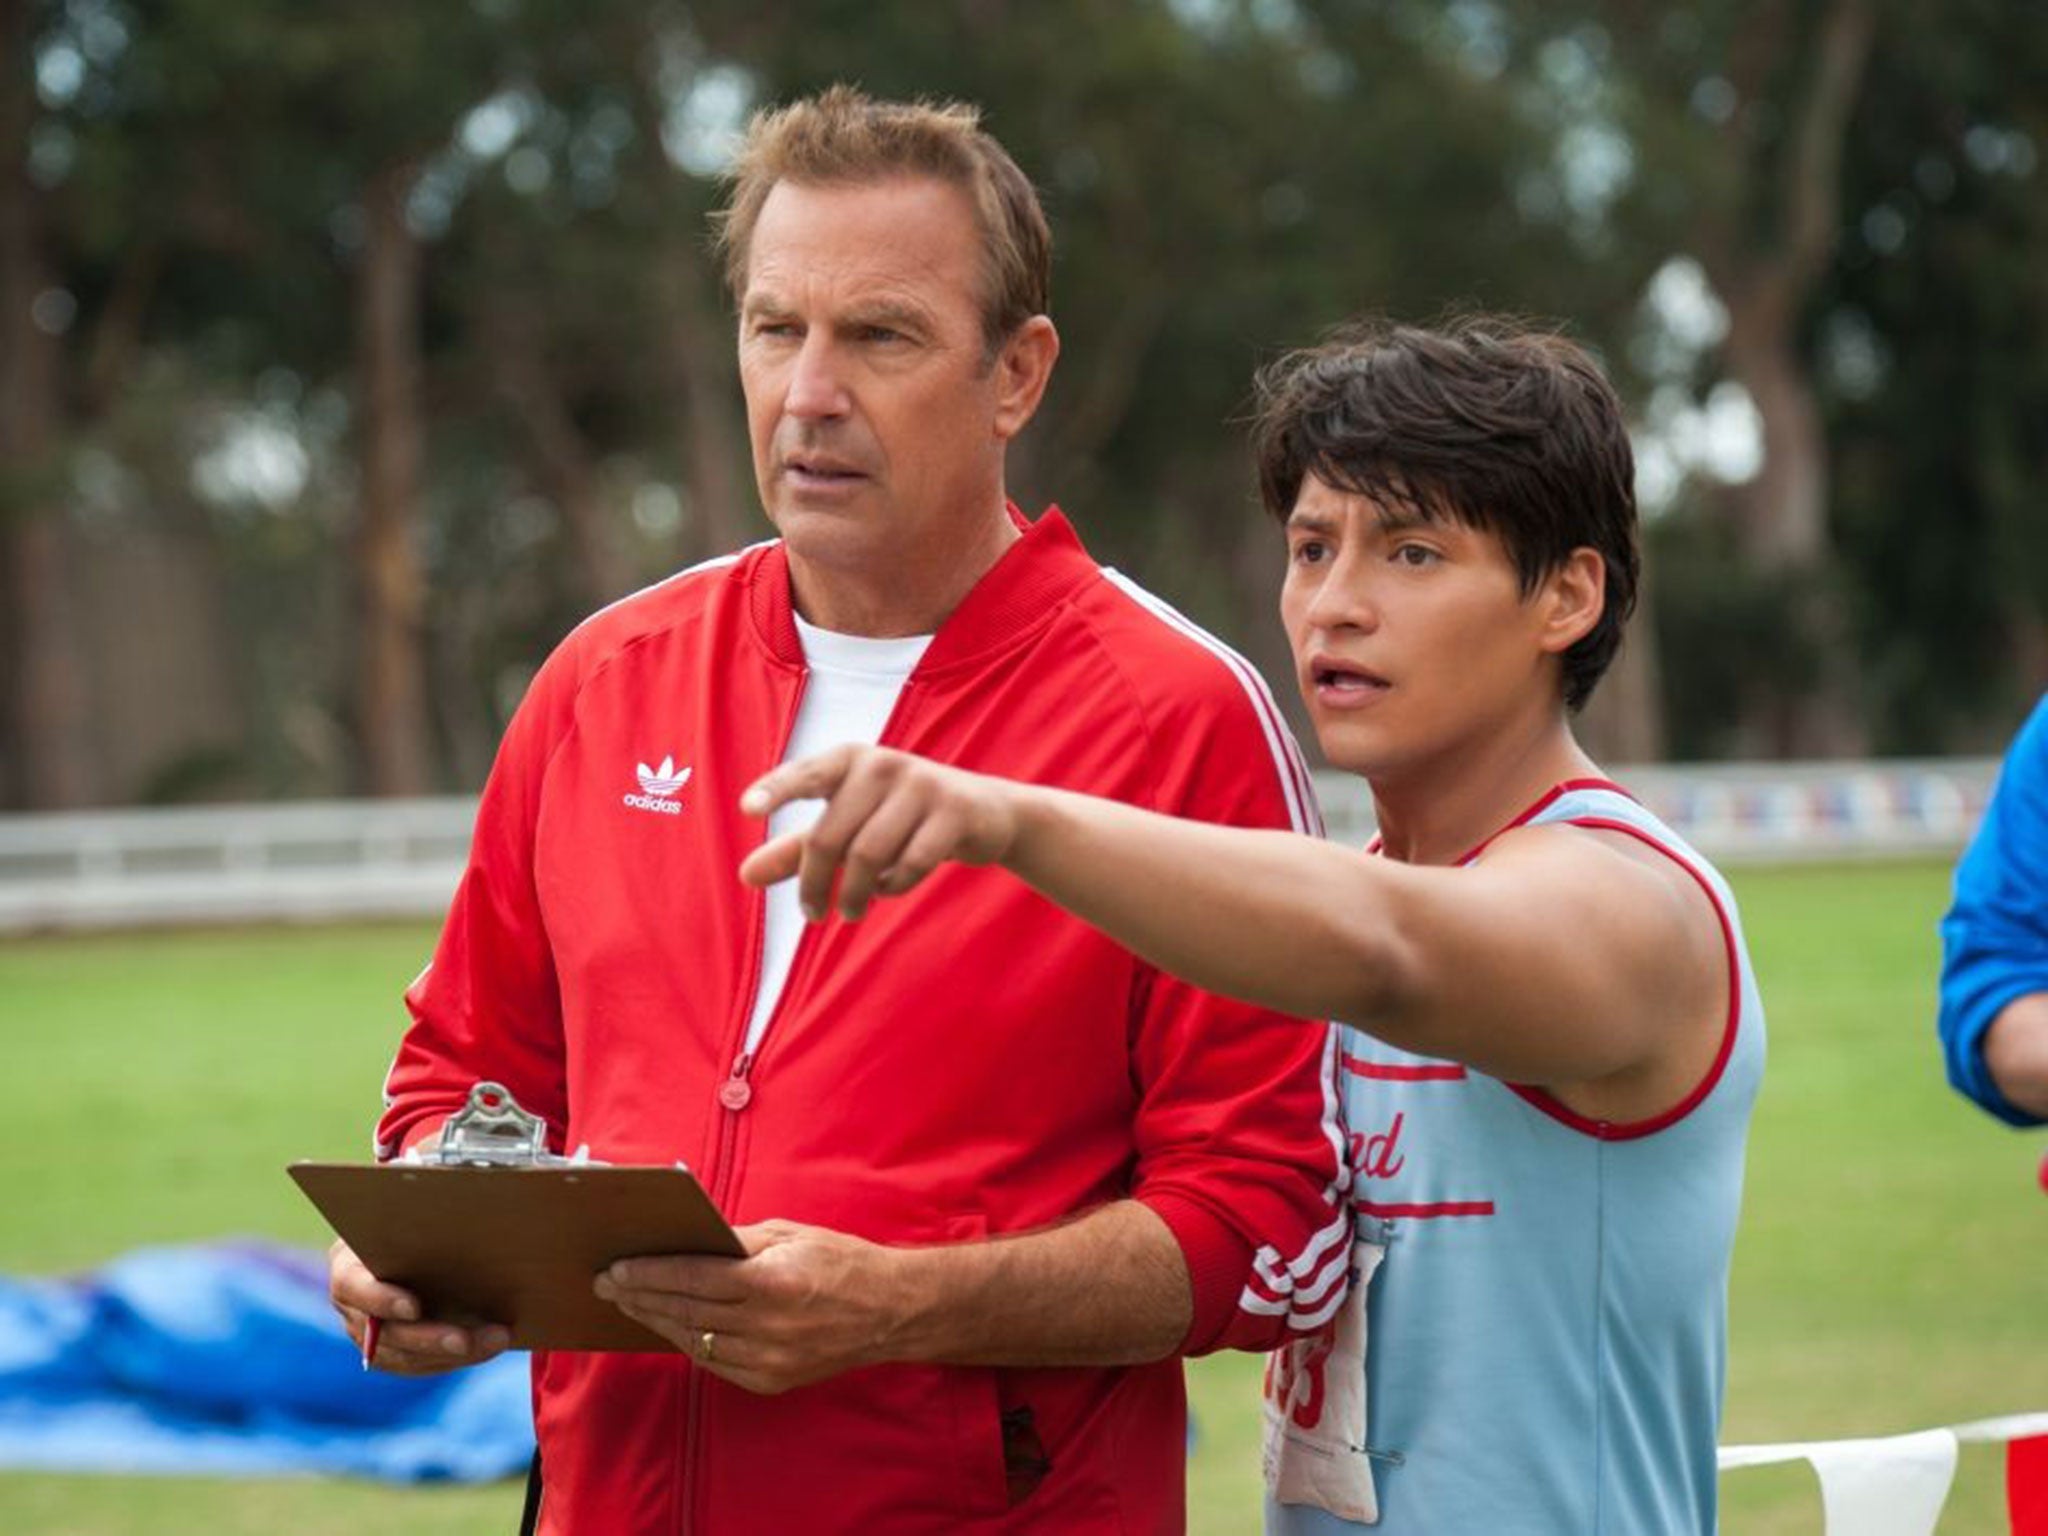 Kevin Costner plays Jim White, a sports coach whose habit of giving underperforming athletes the Fergie treatment costs him his job